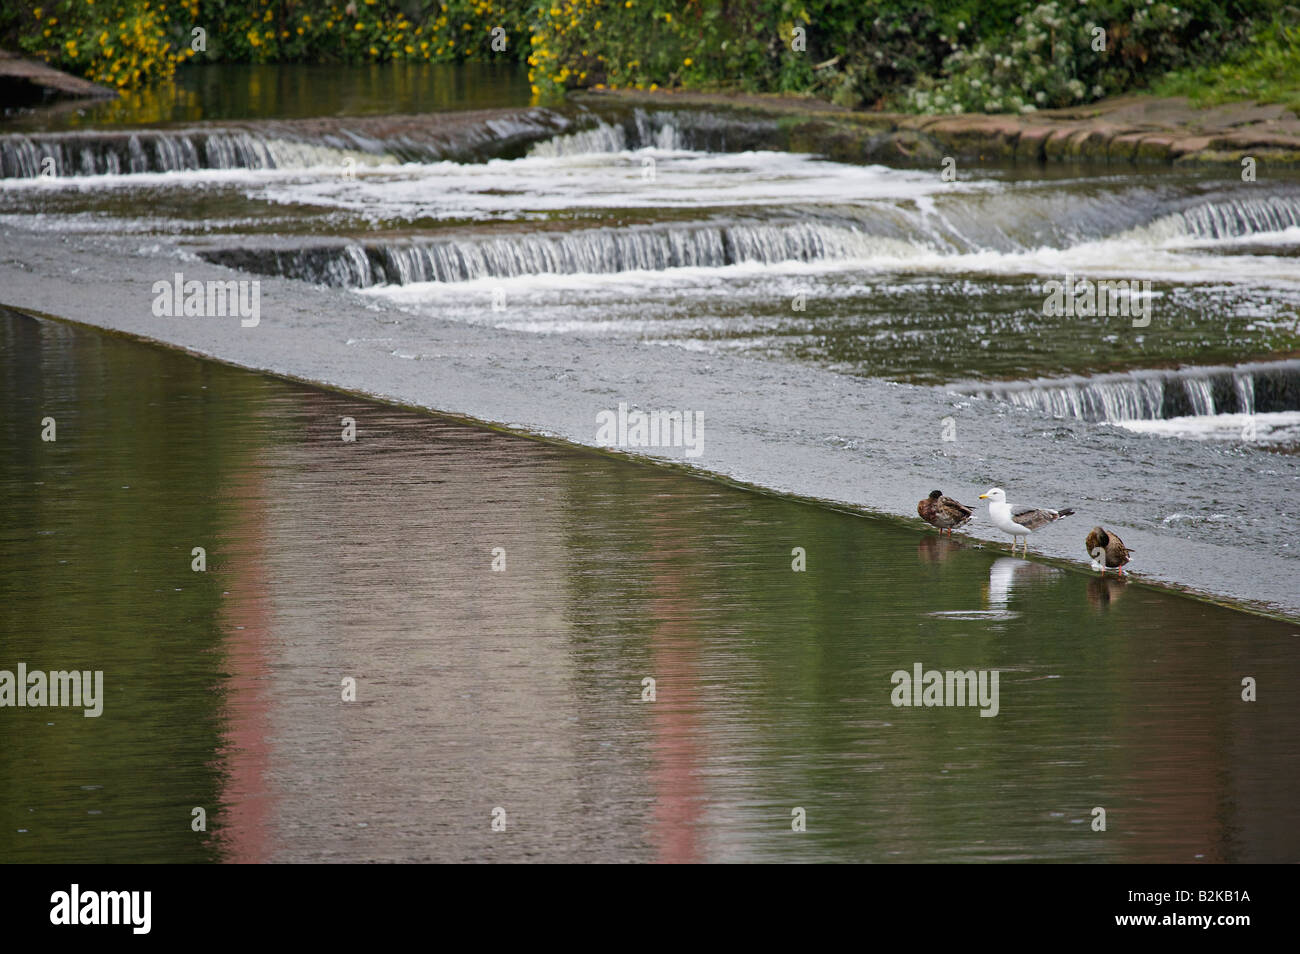 Two ducks and a seagull on the River Dee weir in Chester England UK Stock Photo